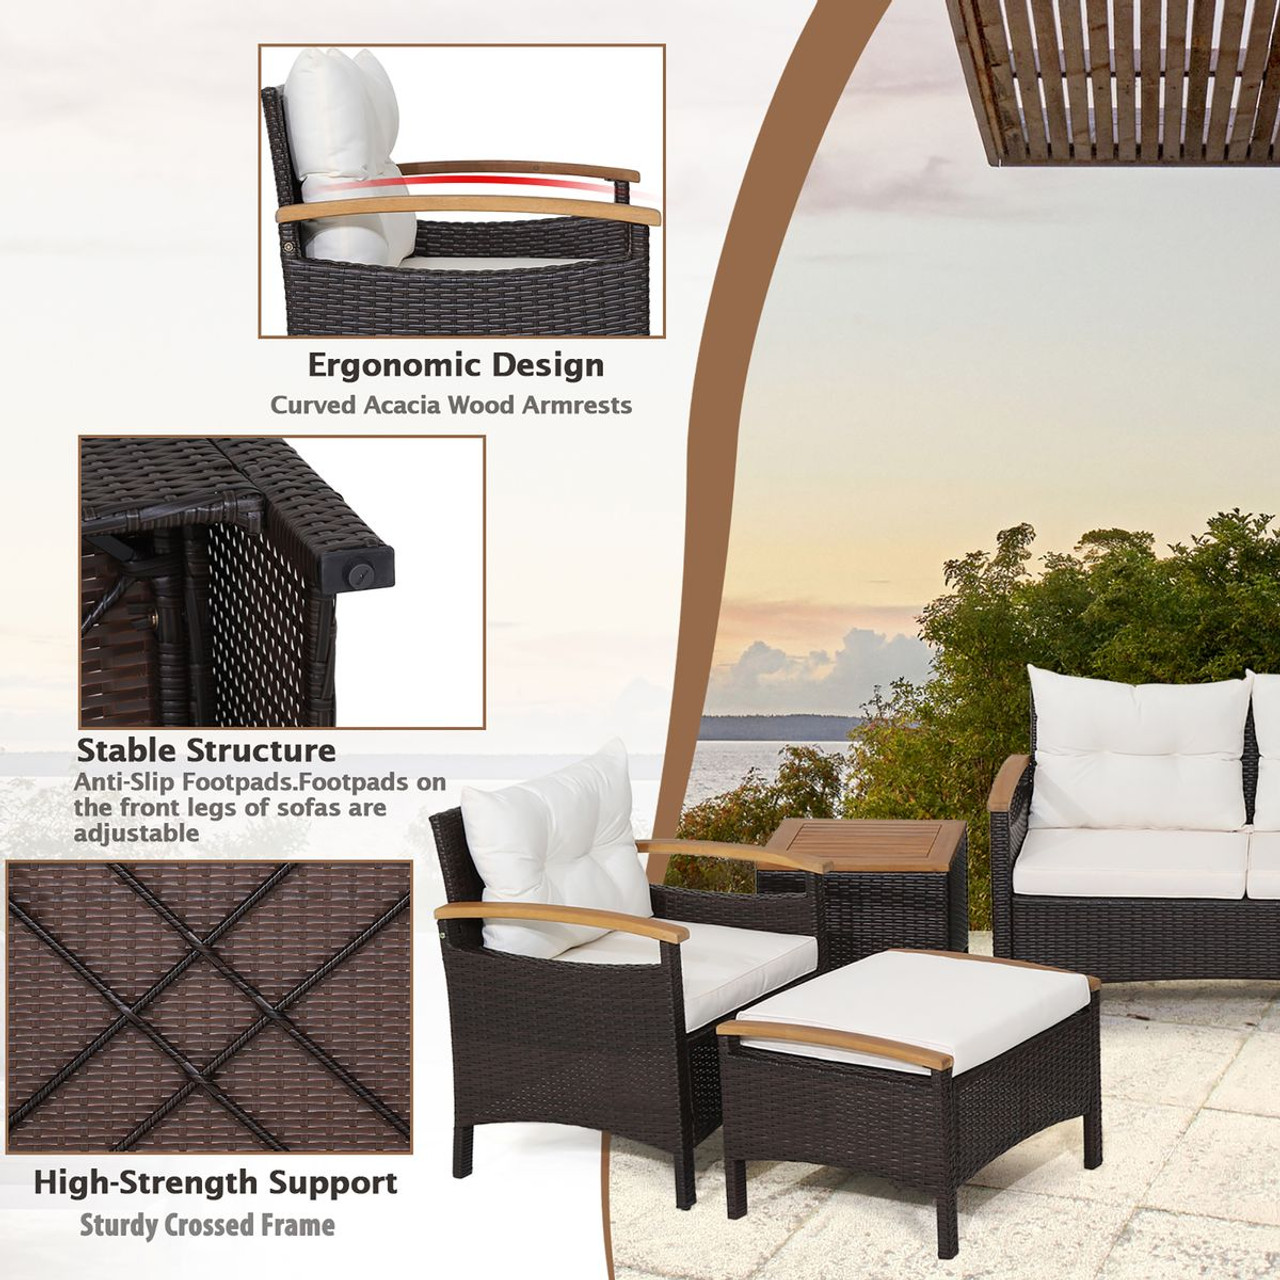 5-Piece Patio Conversation Set with Cushions, Coffee Table, & 2 Ottomans product image